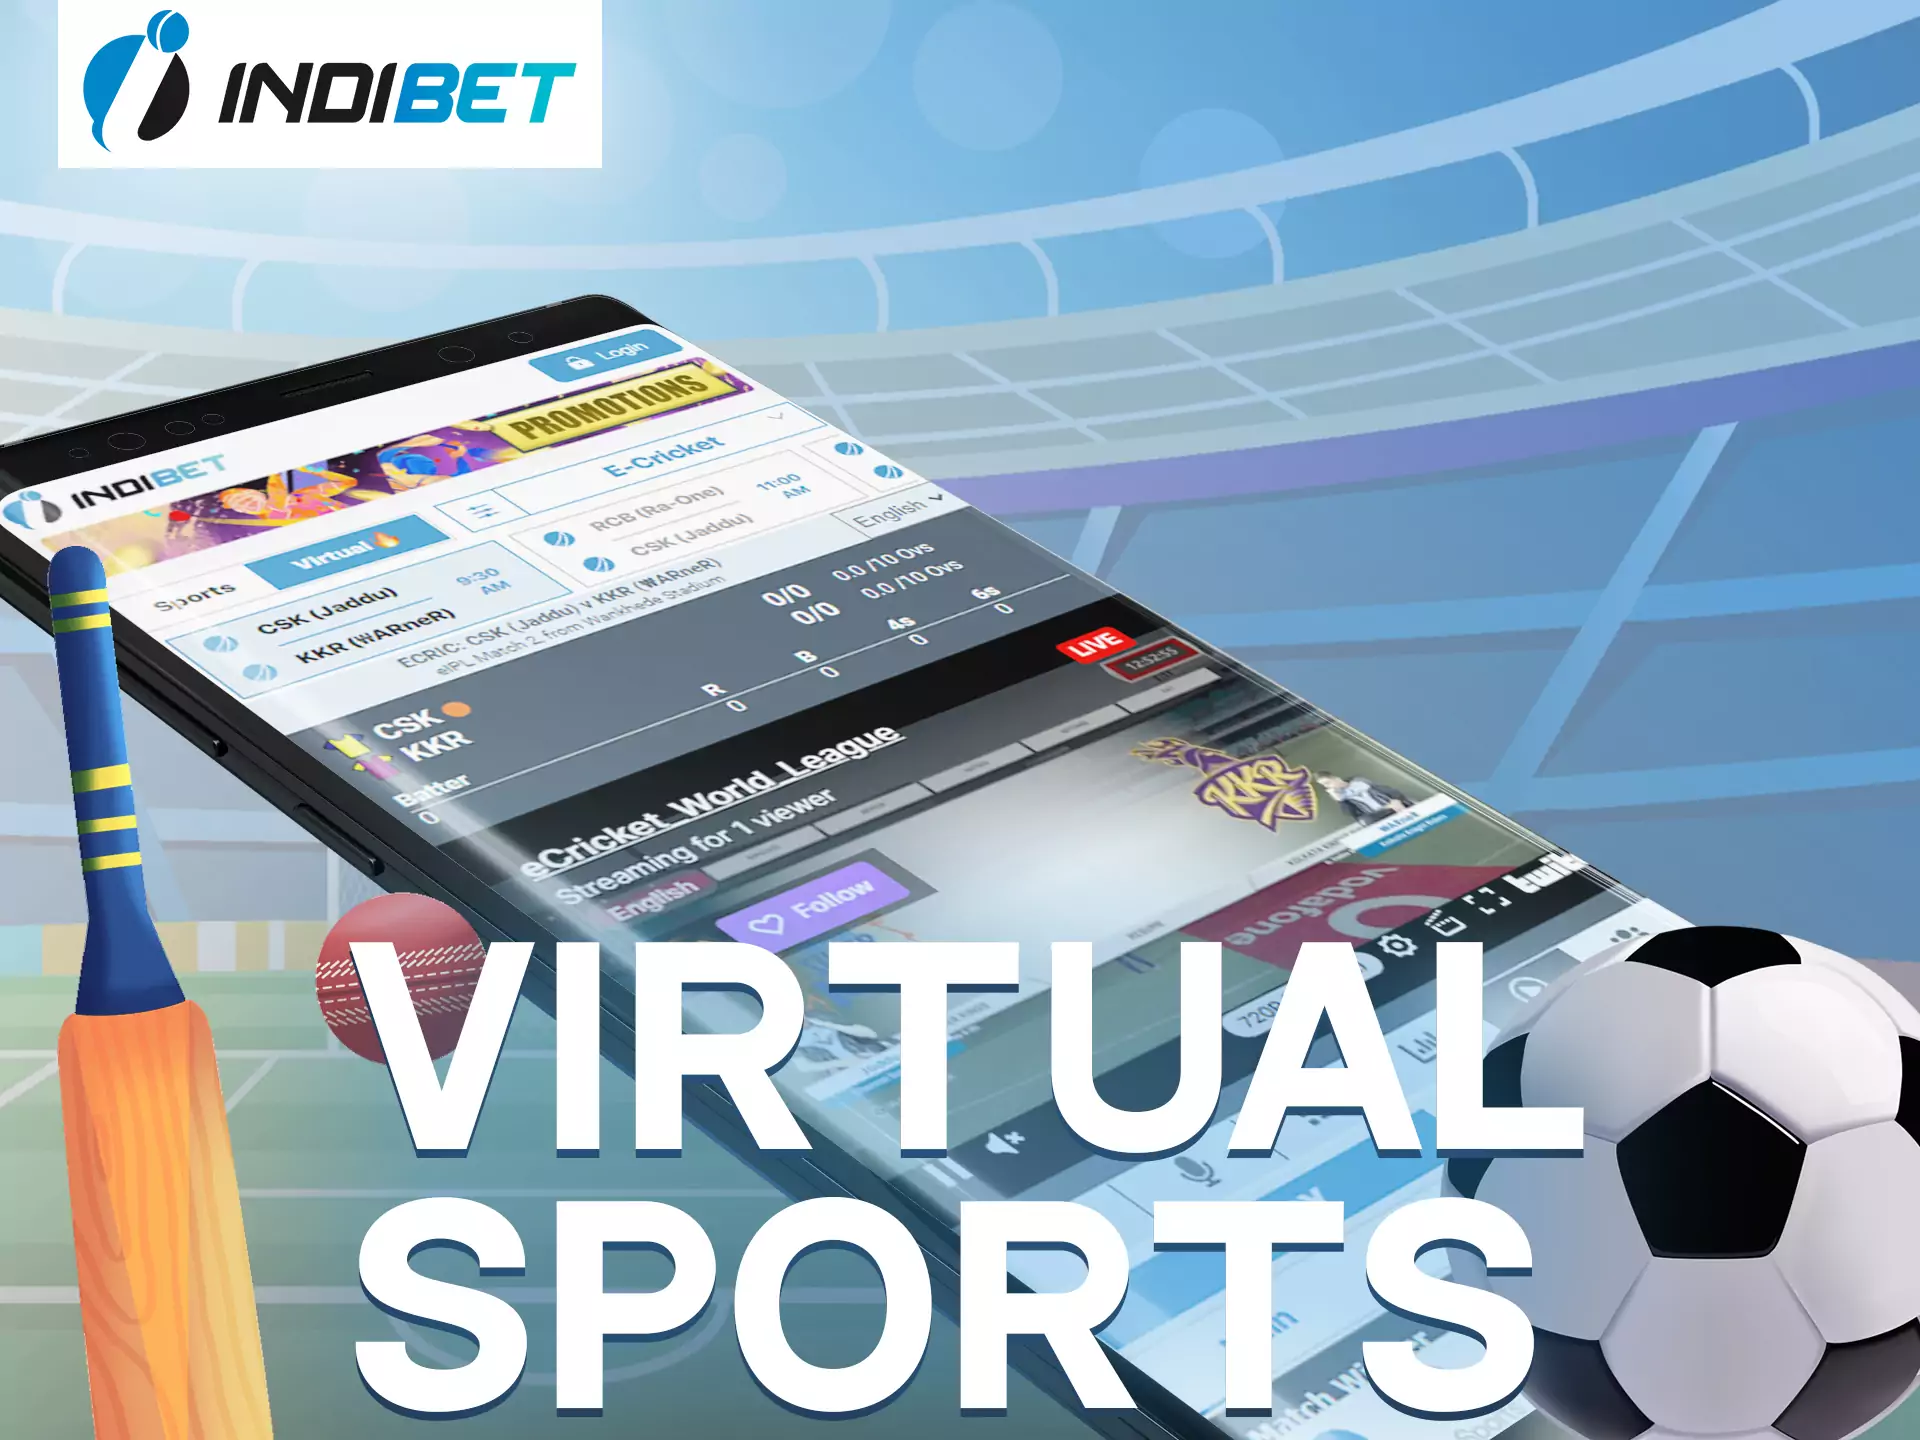 Bet on different virtual sports at Indibet.